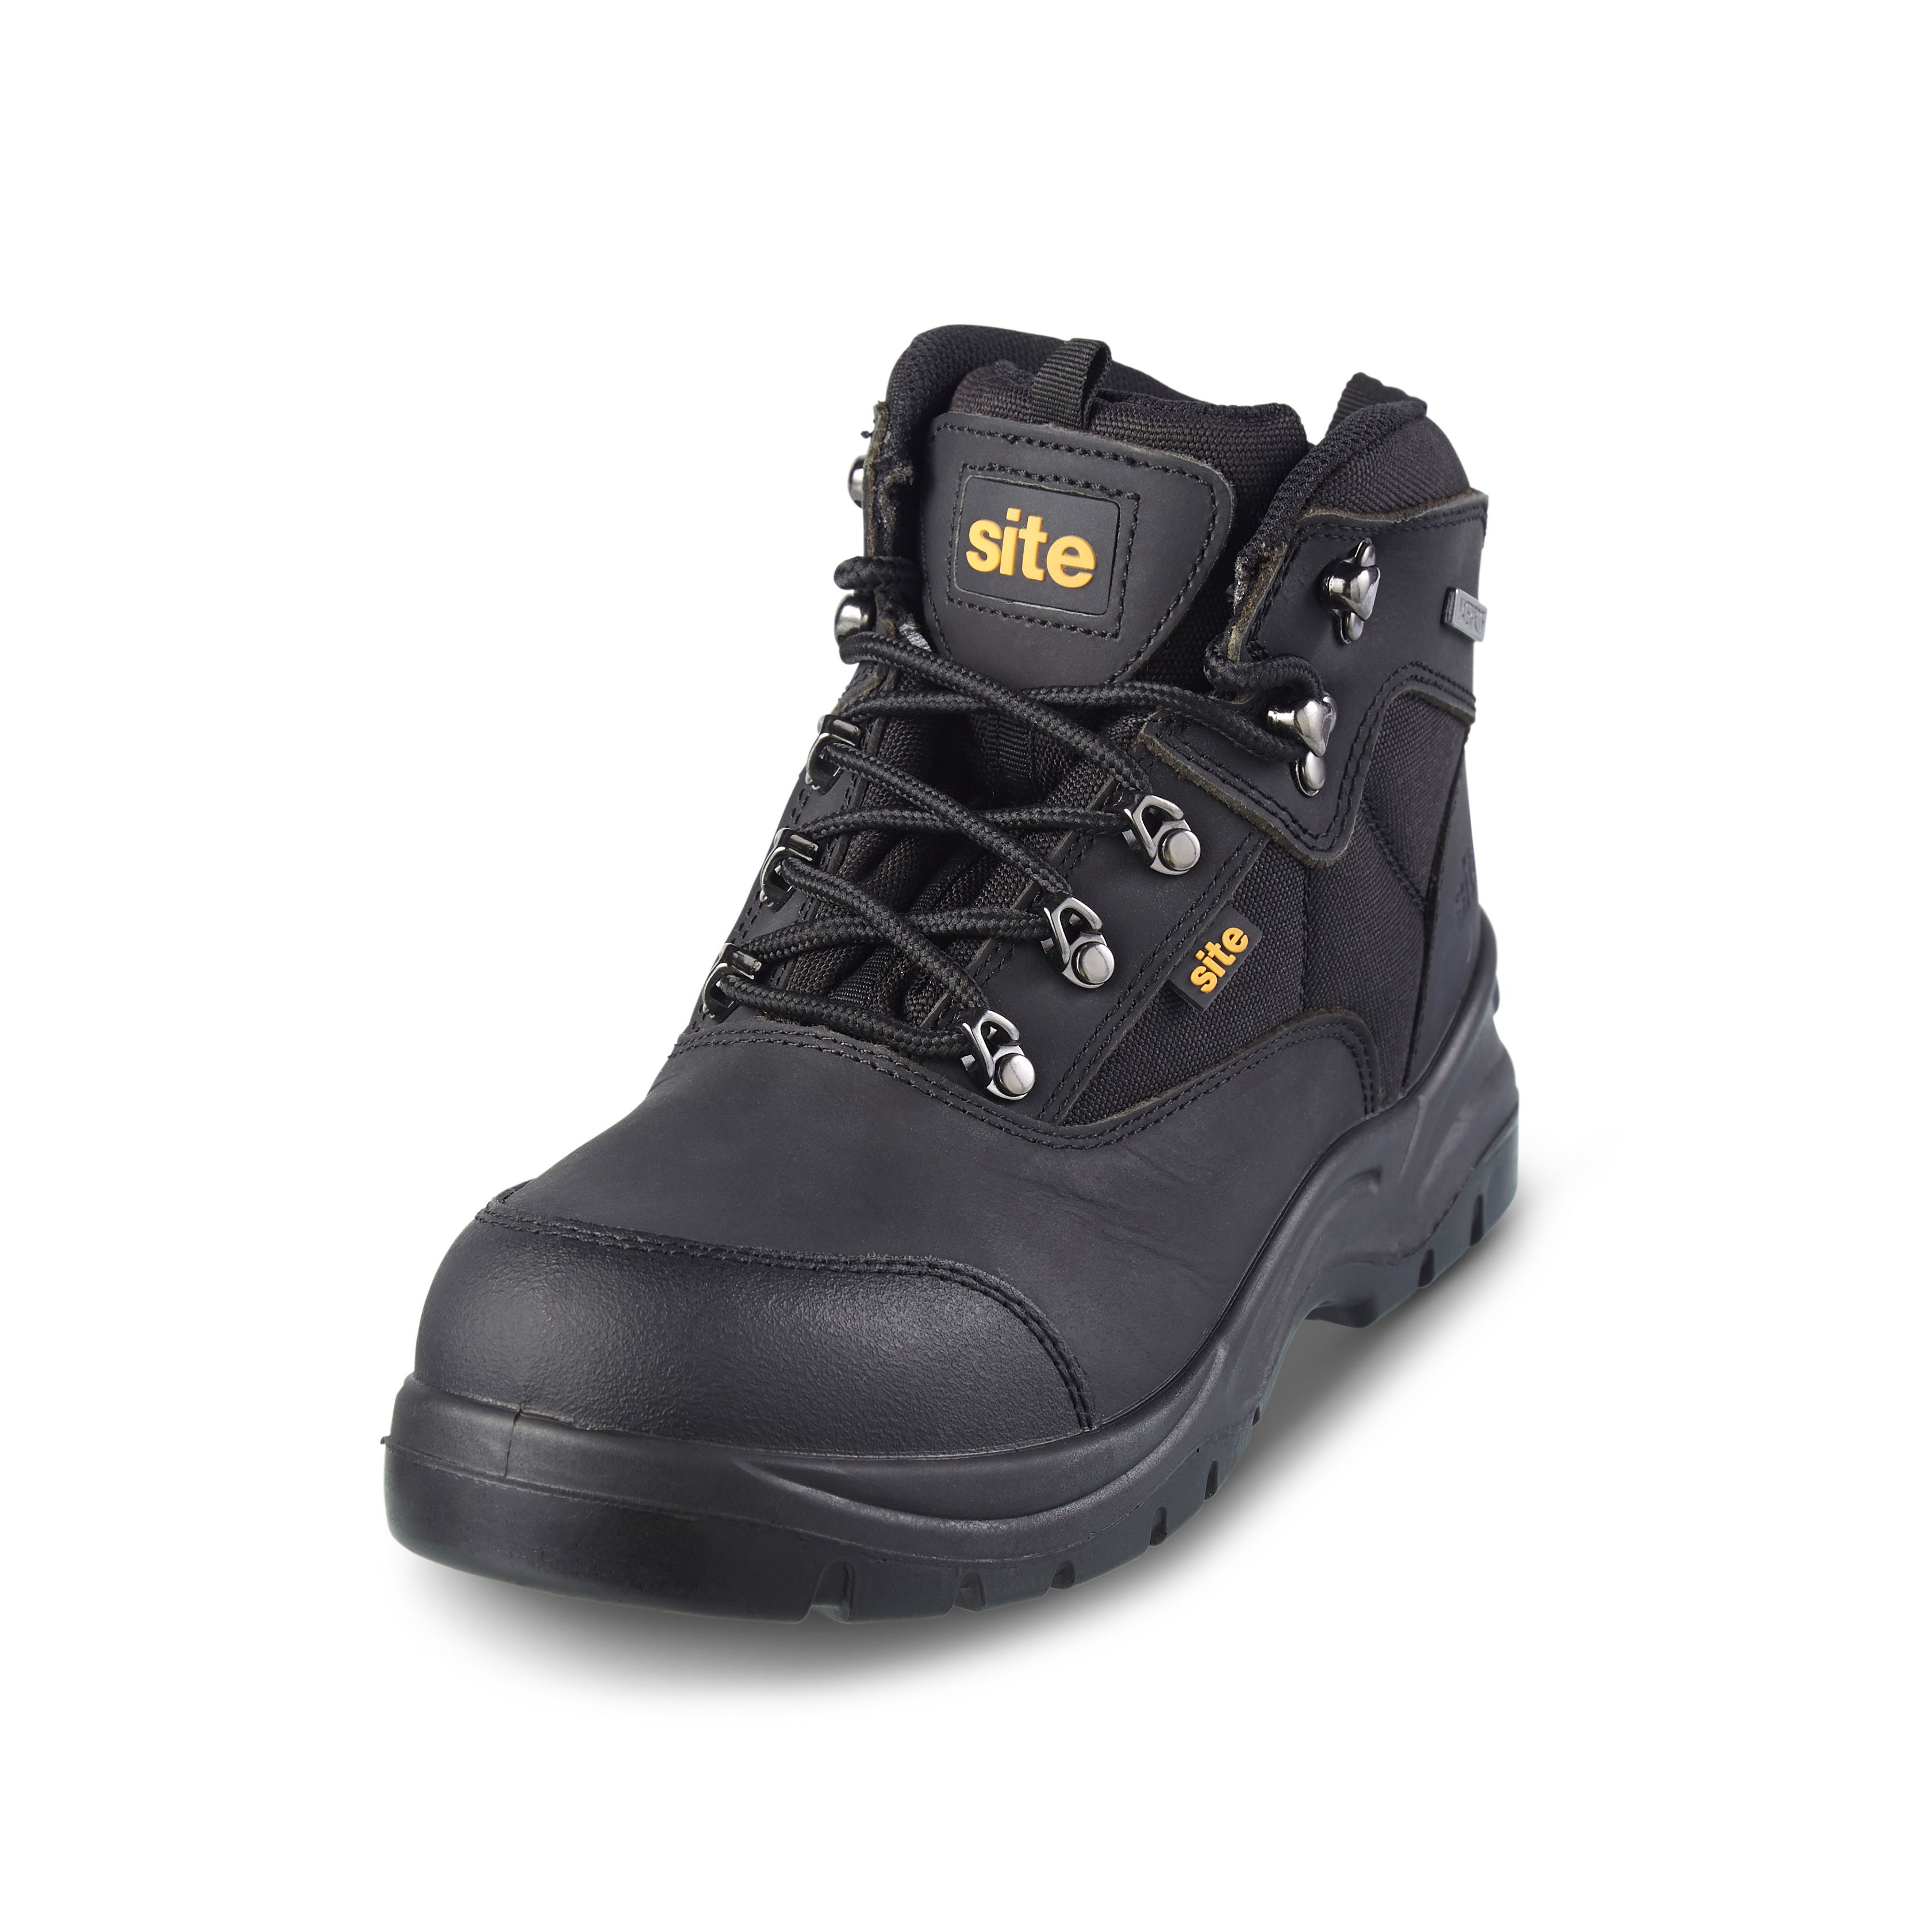 safety site boots